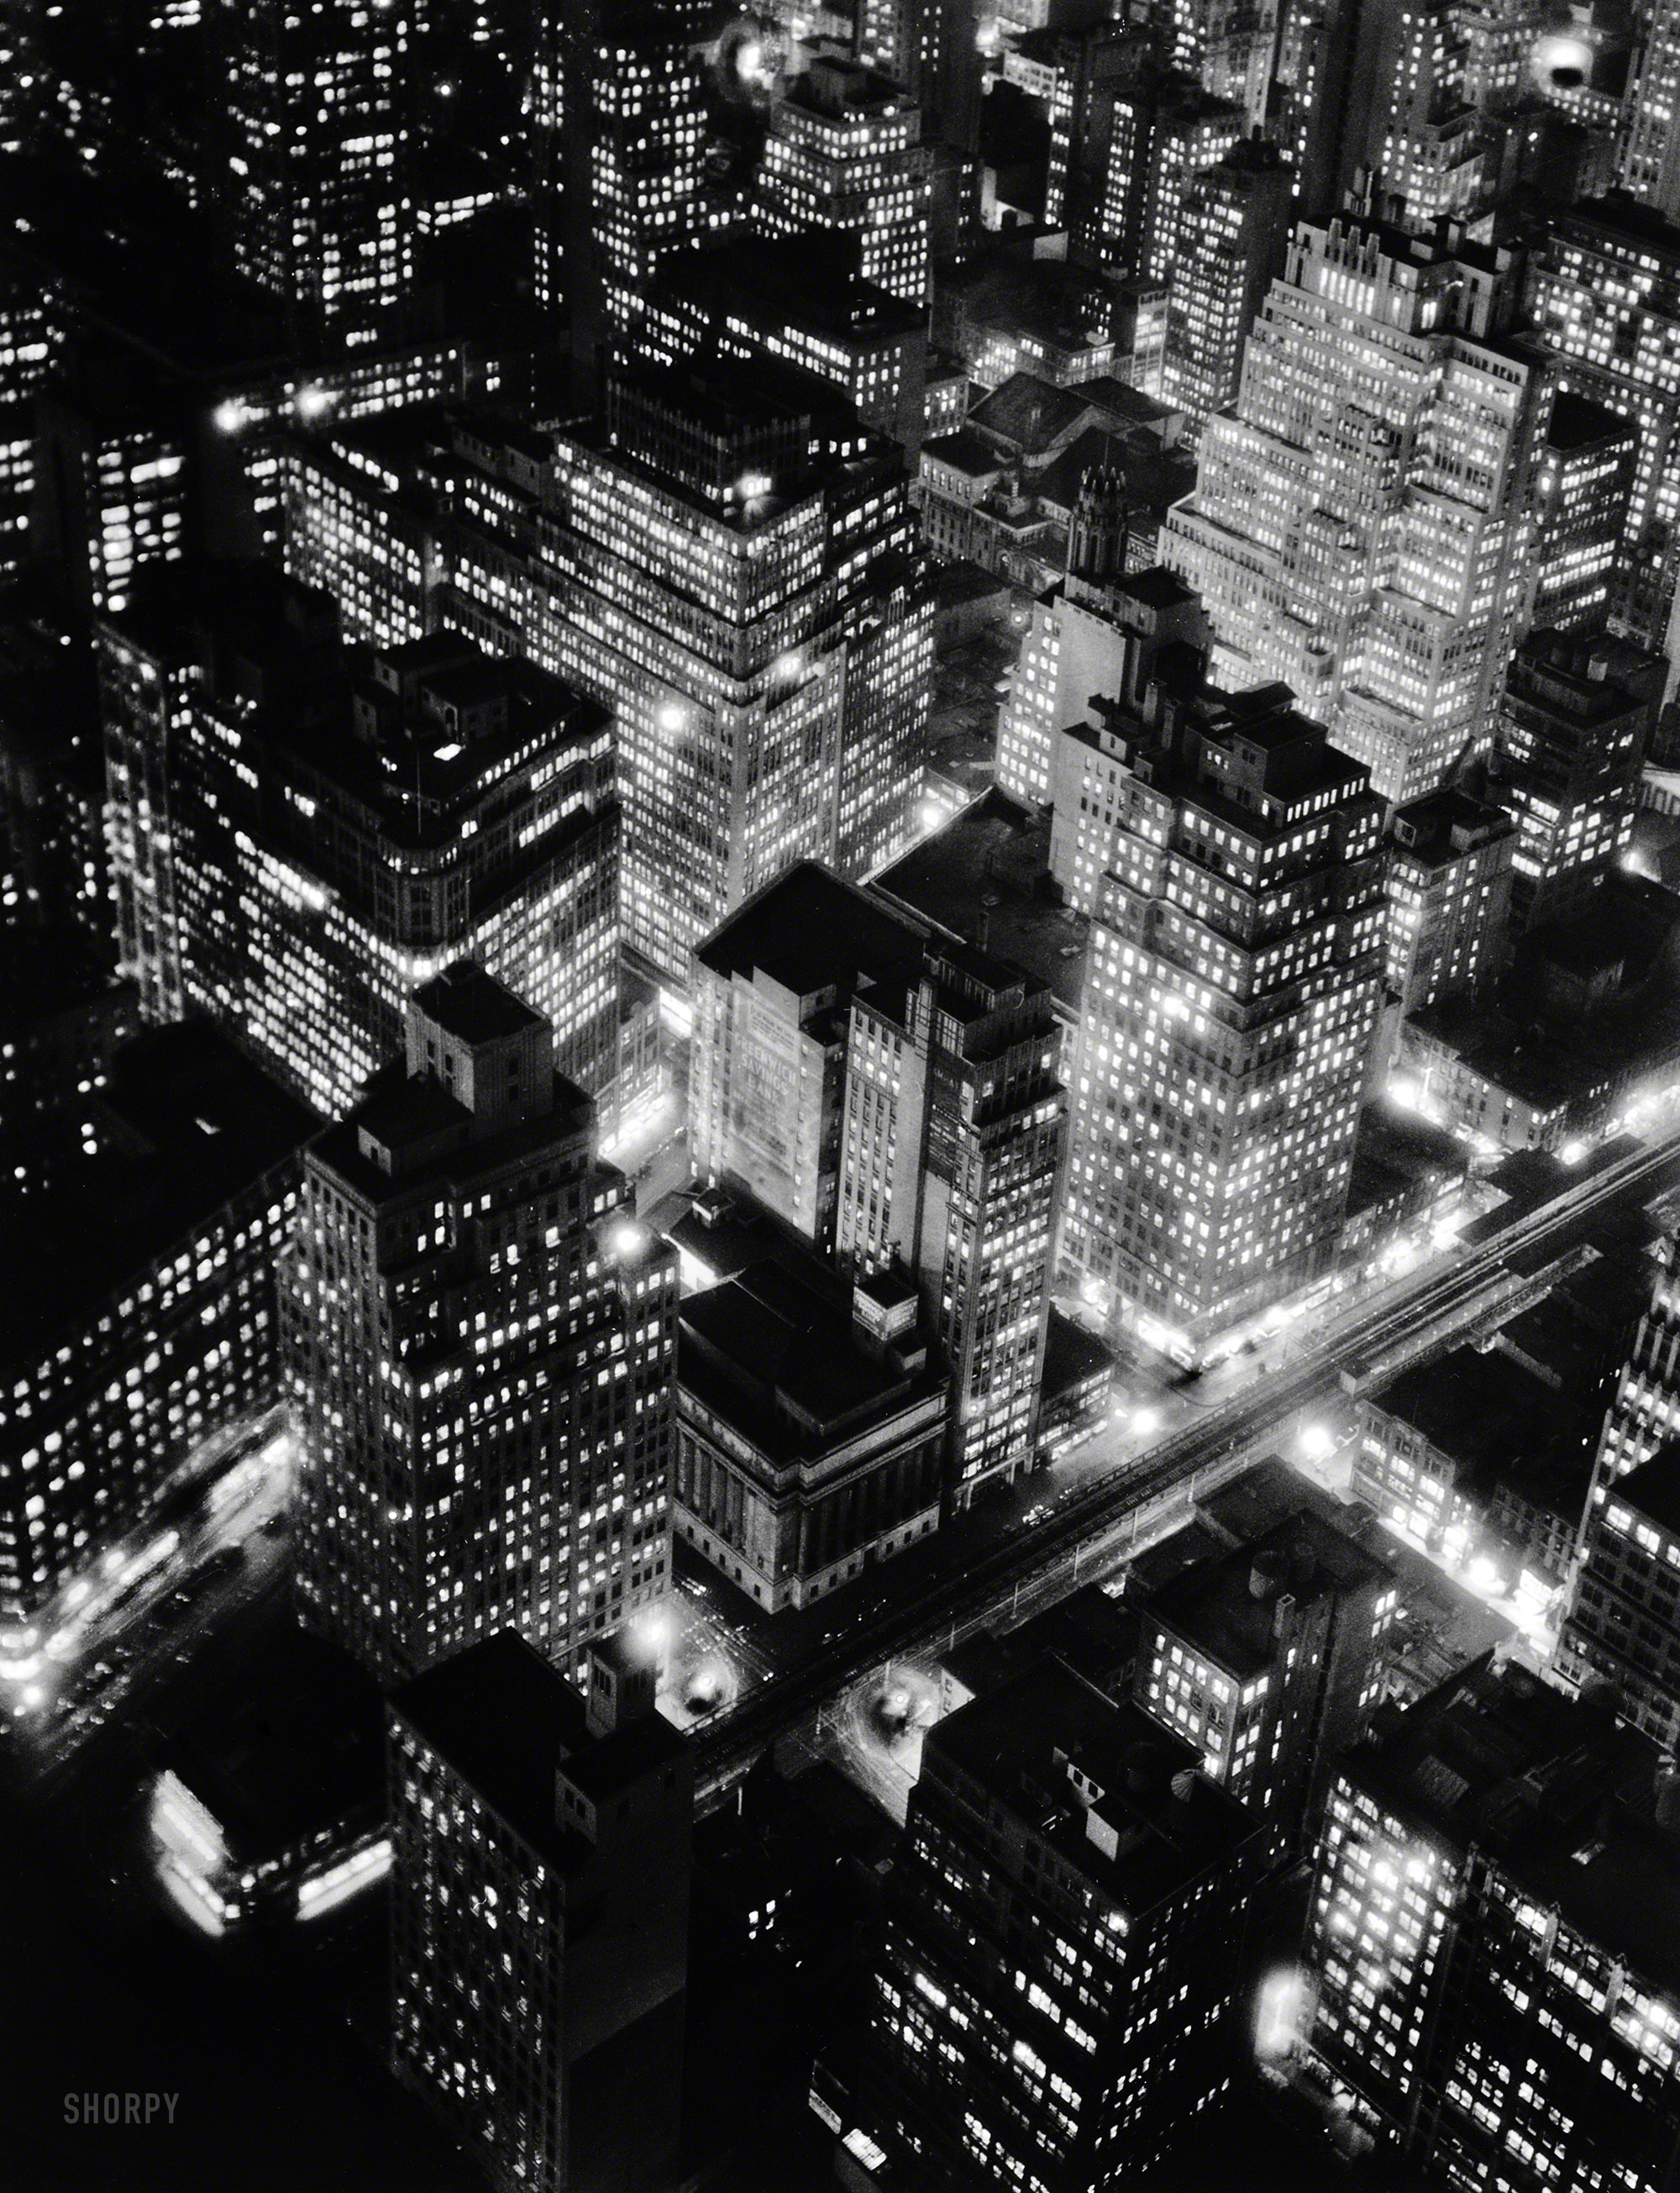 New York circa 1932. "Night view, Manhattan." Photo by Berenice Abbott (1898- 1991). Library of Congress Prints & Photographs Collection. View full size.